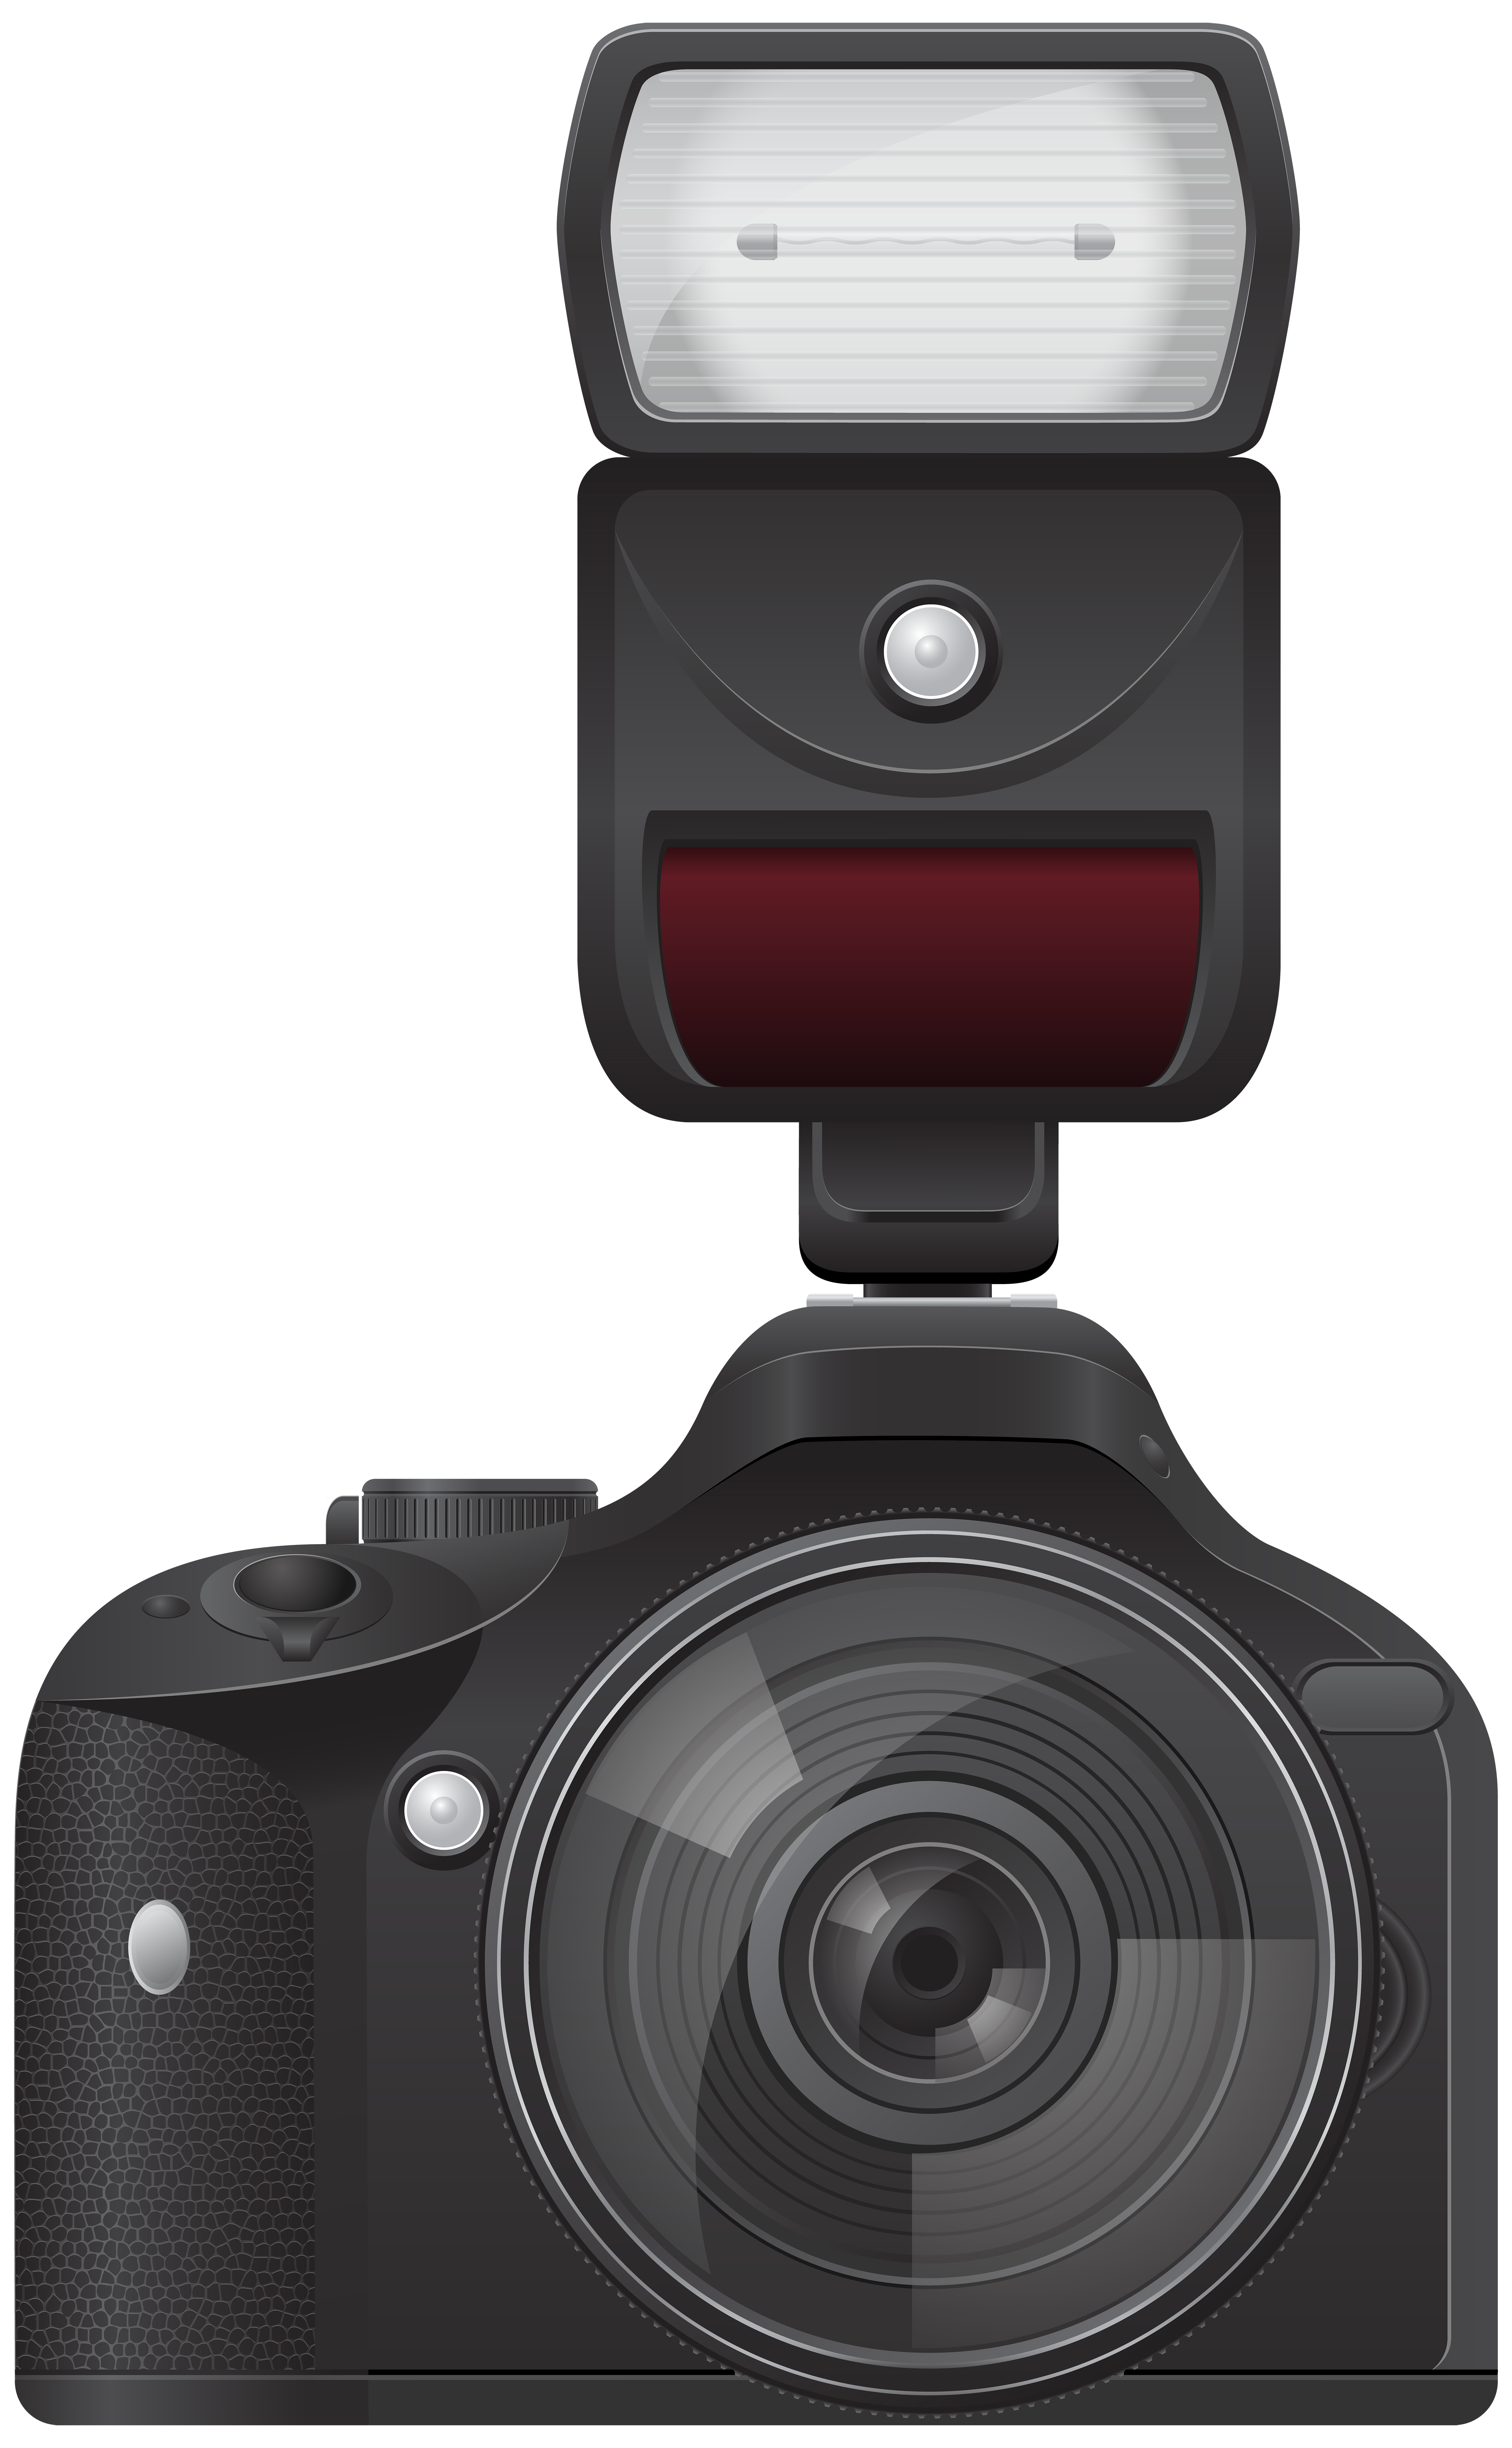 Camera with Flash Transparent PNG Image.